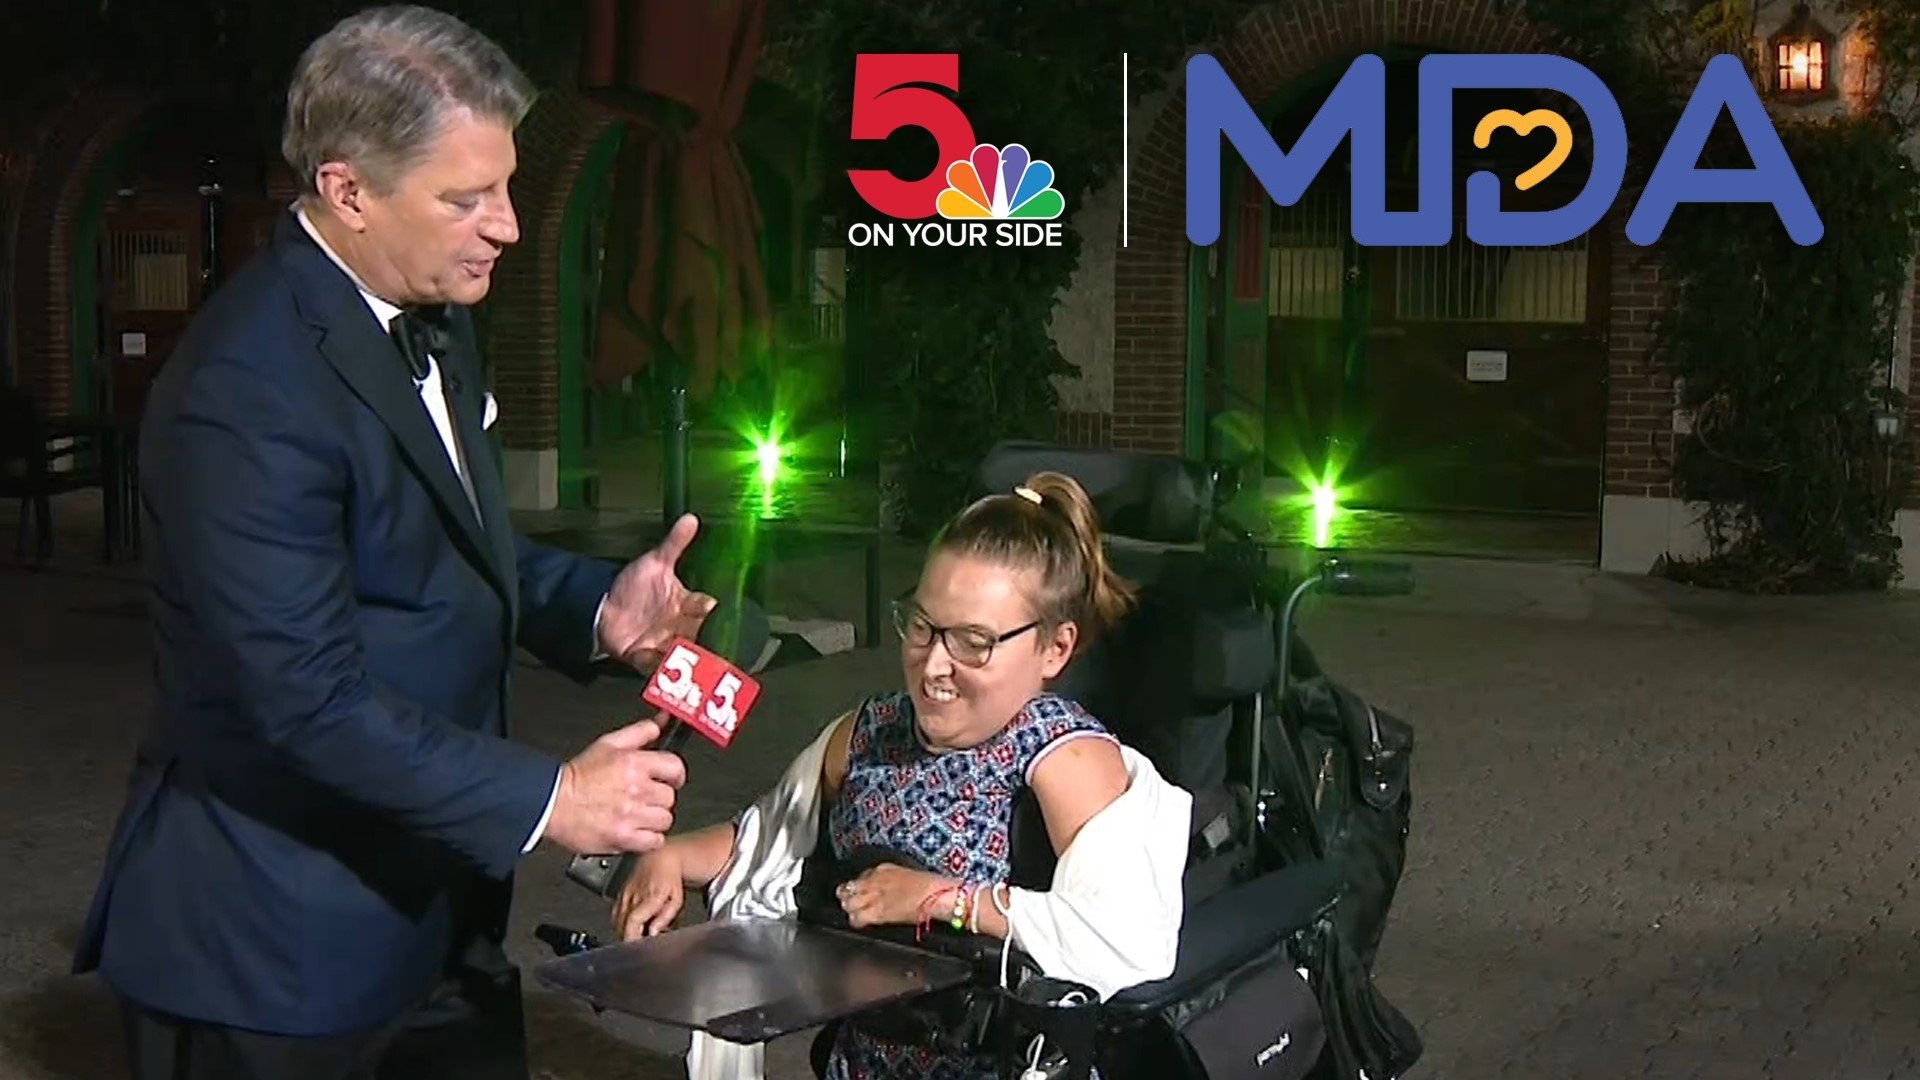 5 On Your Side’s annual "Show of Strength" telethon benefitting the Muscular Dystrophy Association returned to Grant’s Farm for 2023.